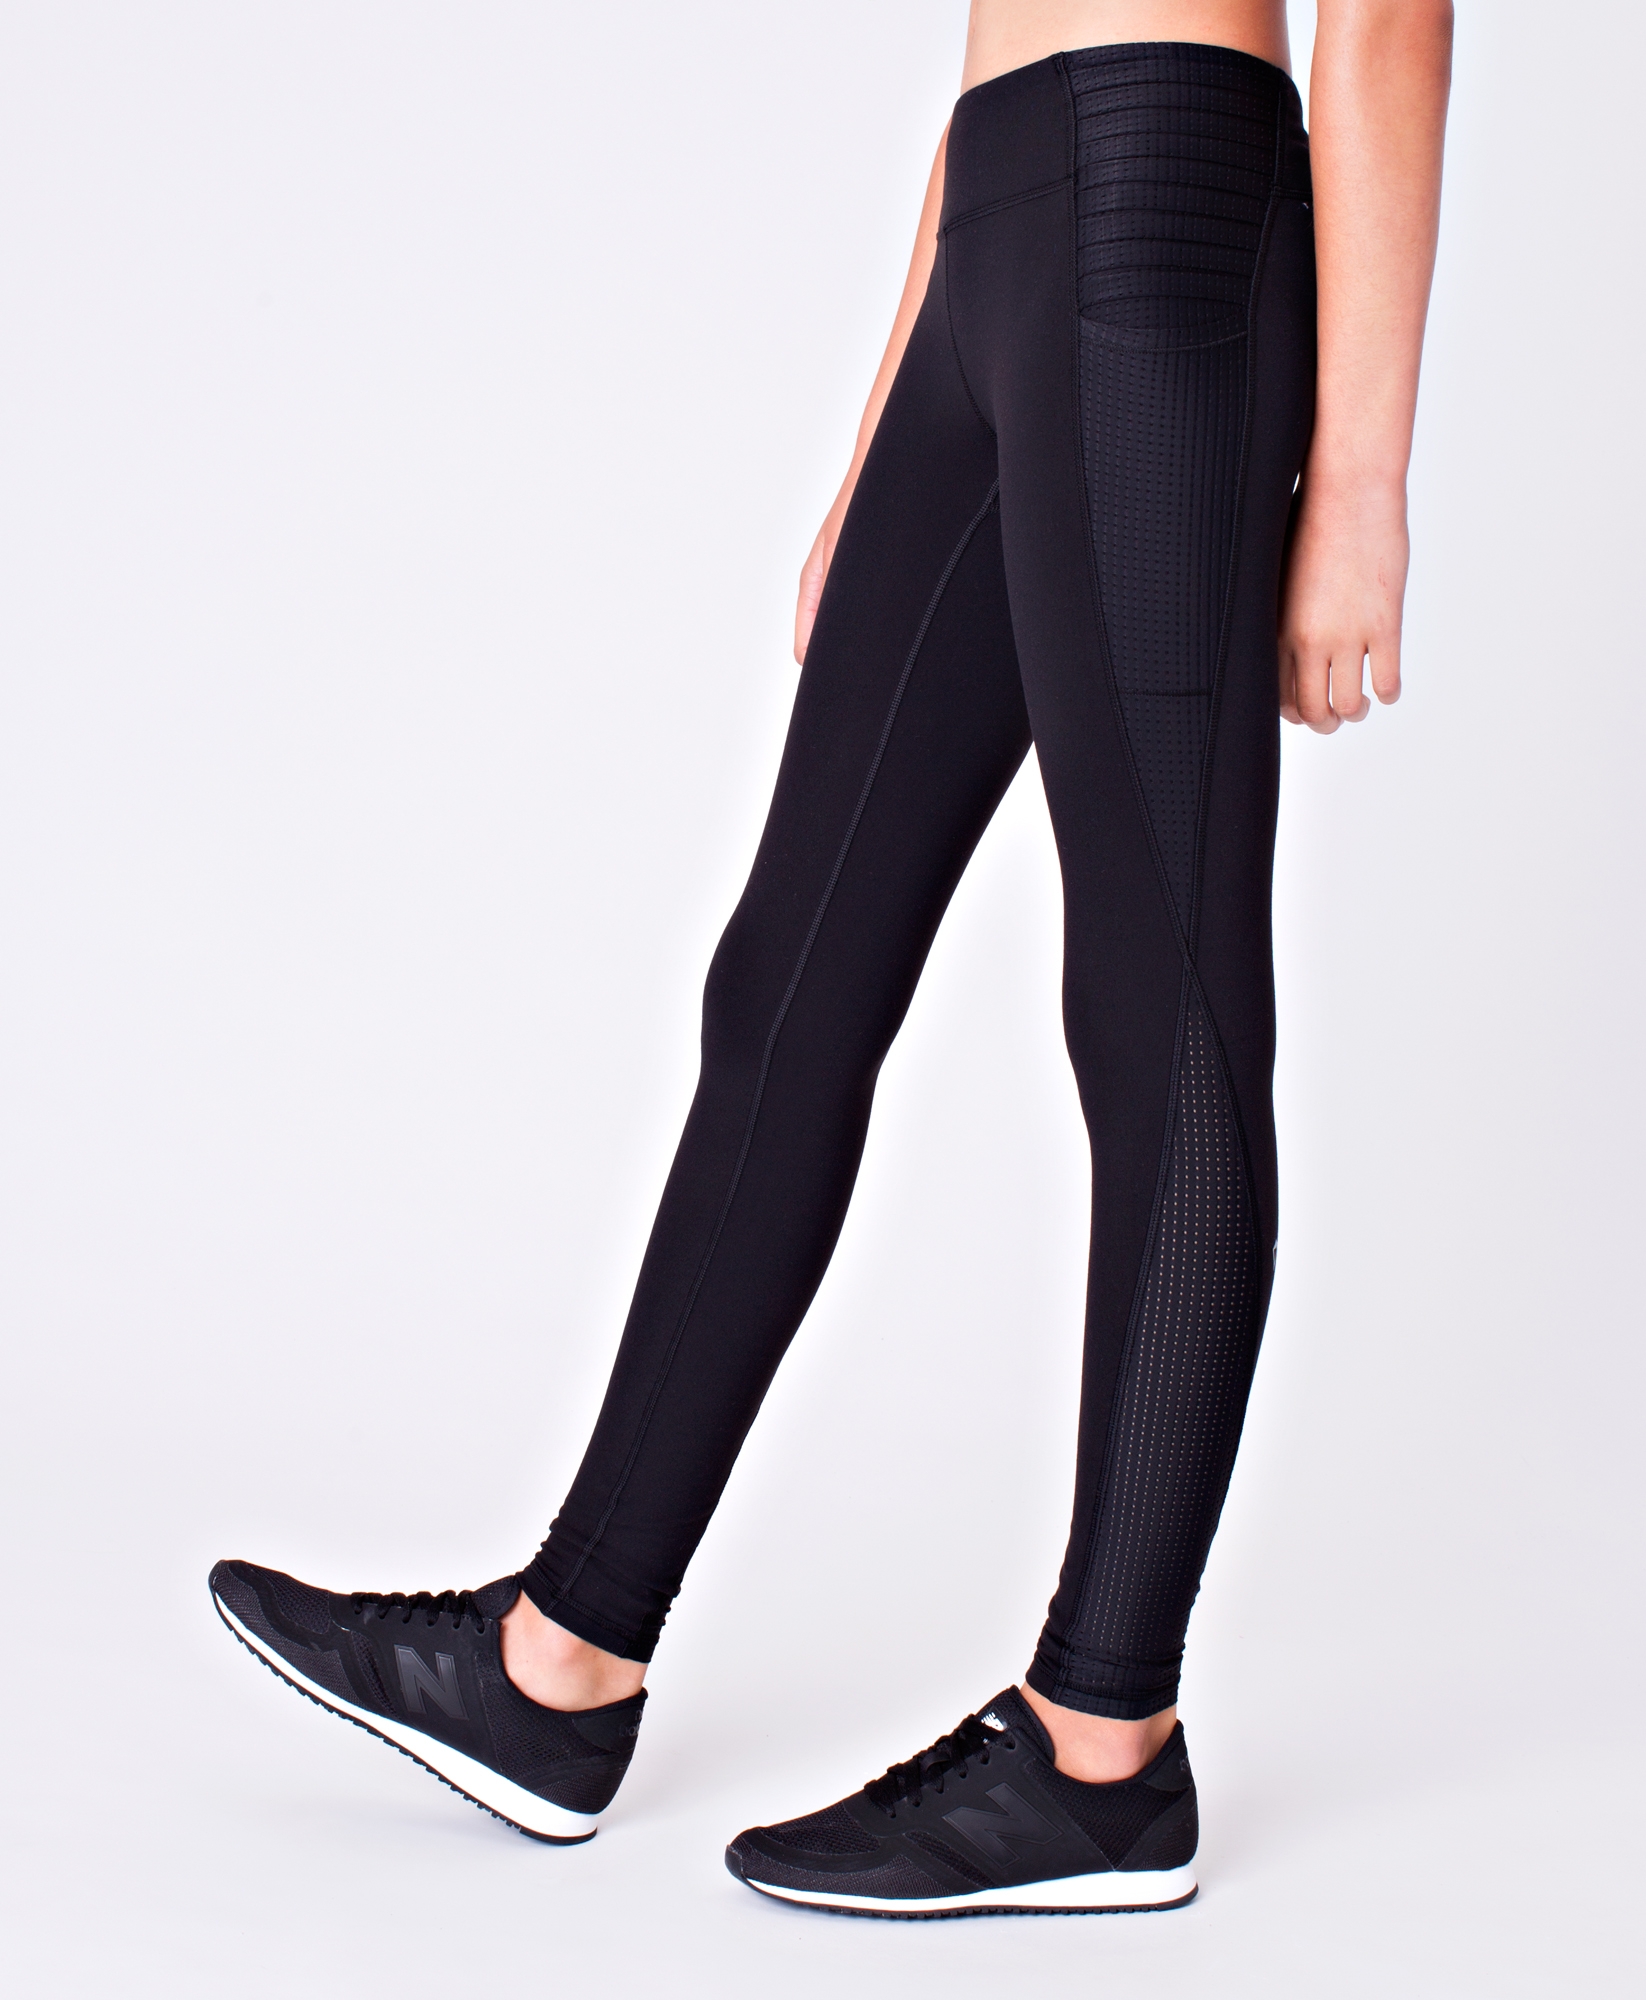 ivivva leggings, great condition stretchy and